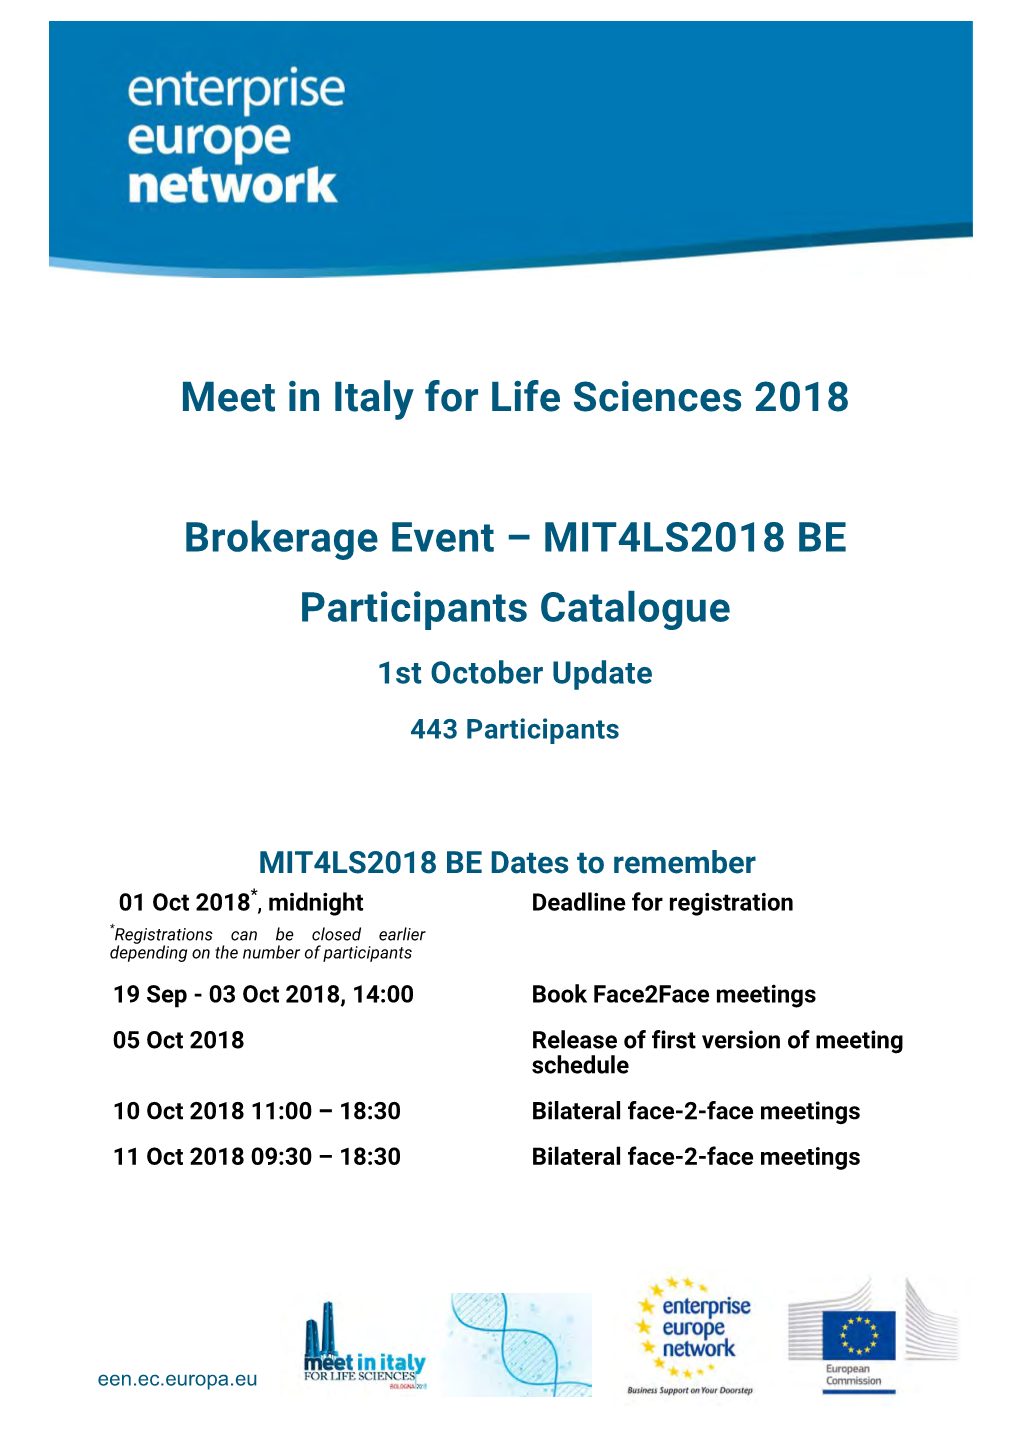 Meet in Italy for Life Sciences 2018 Brokerage Event – MIT4LS2018 BE